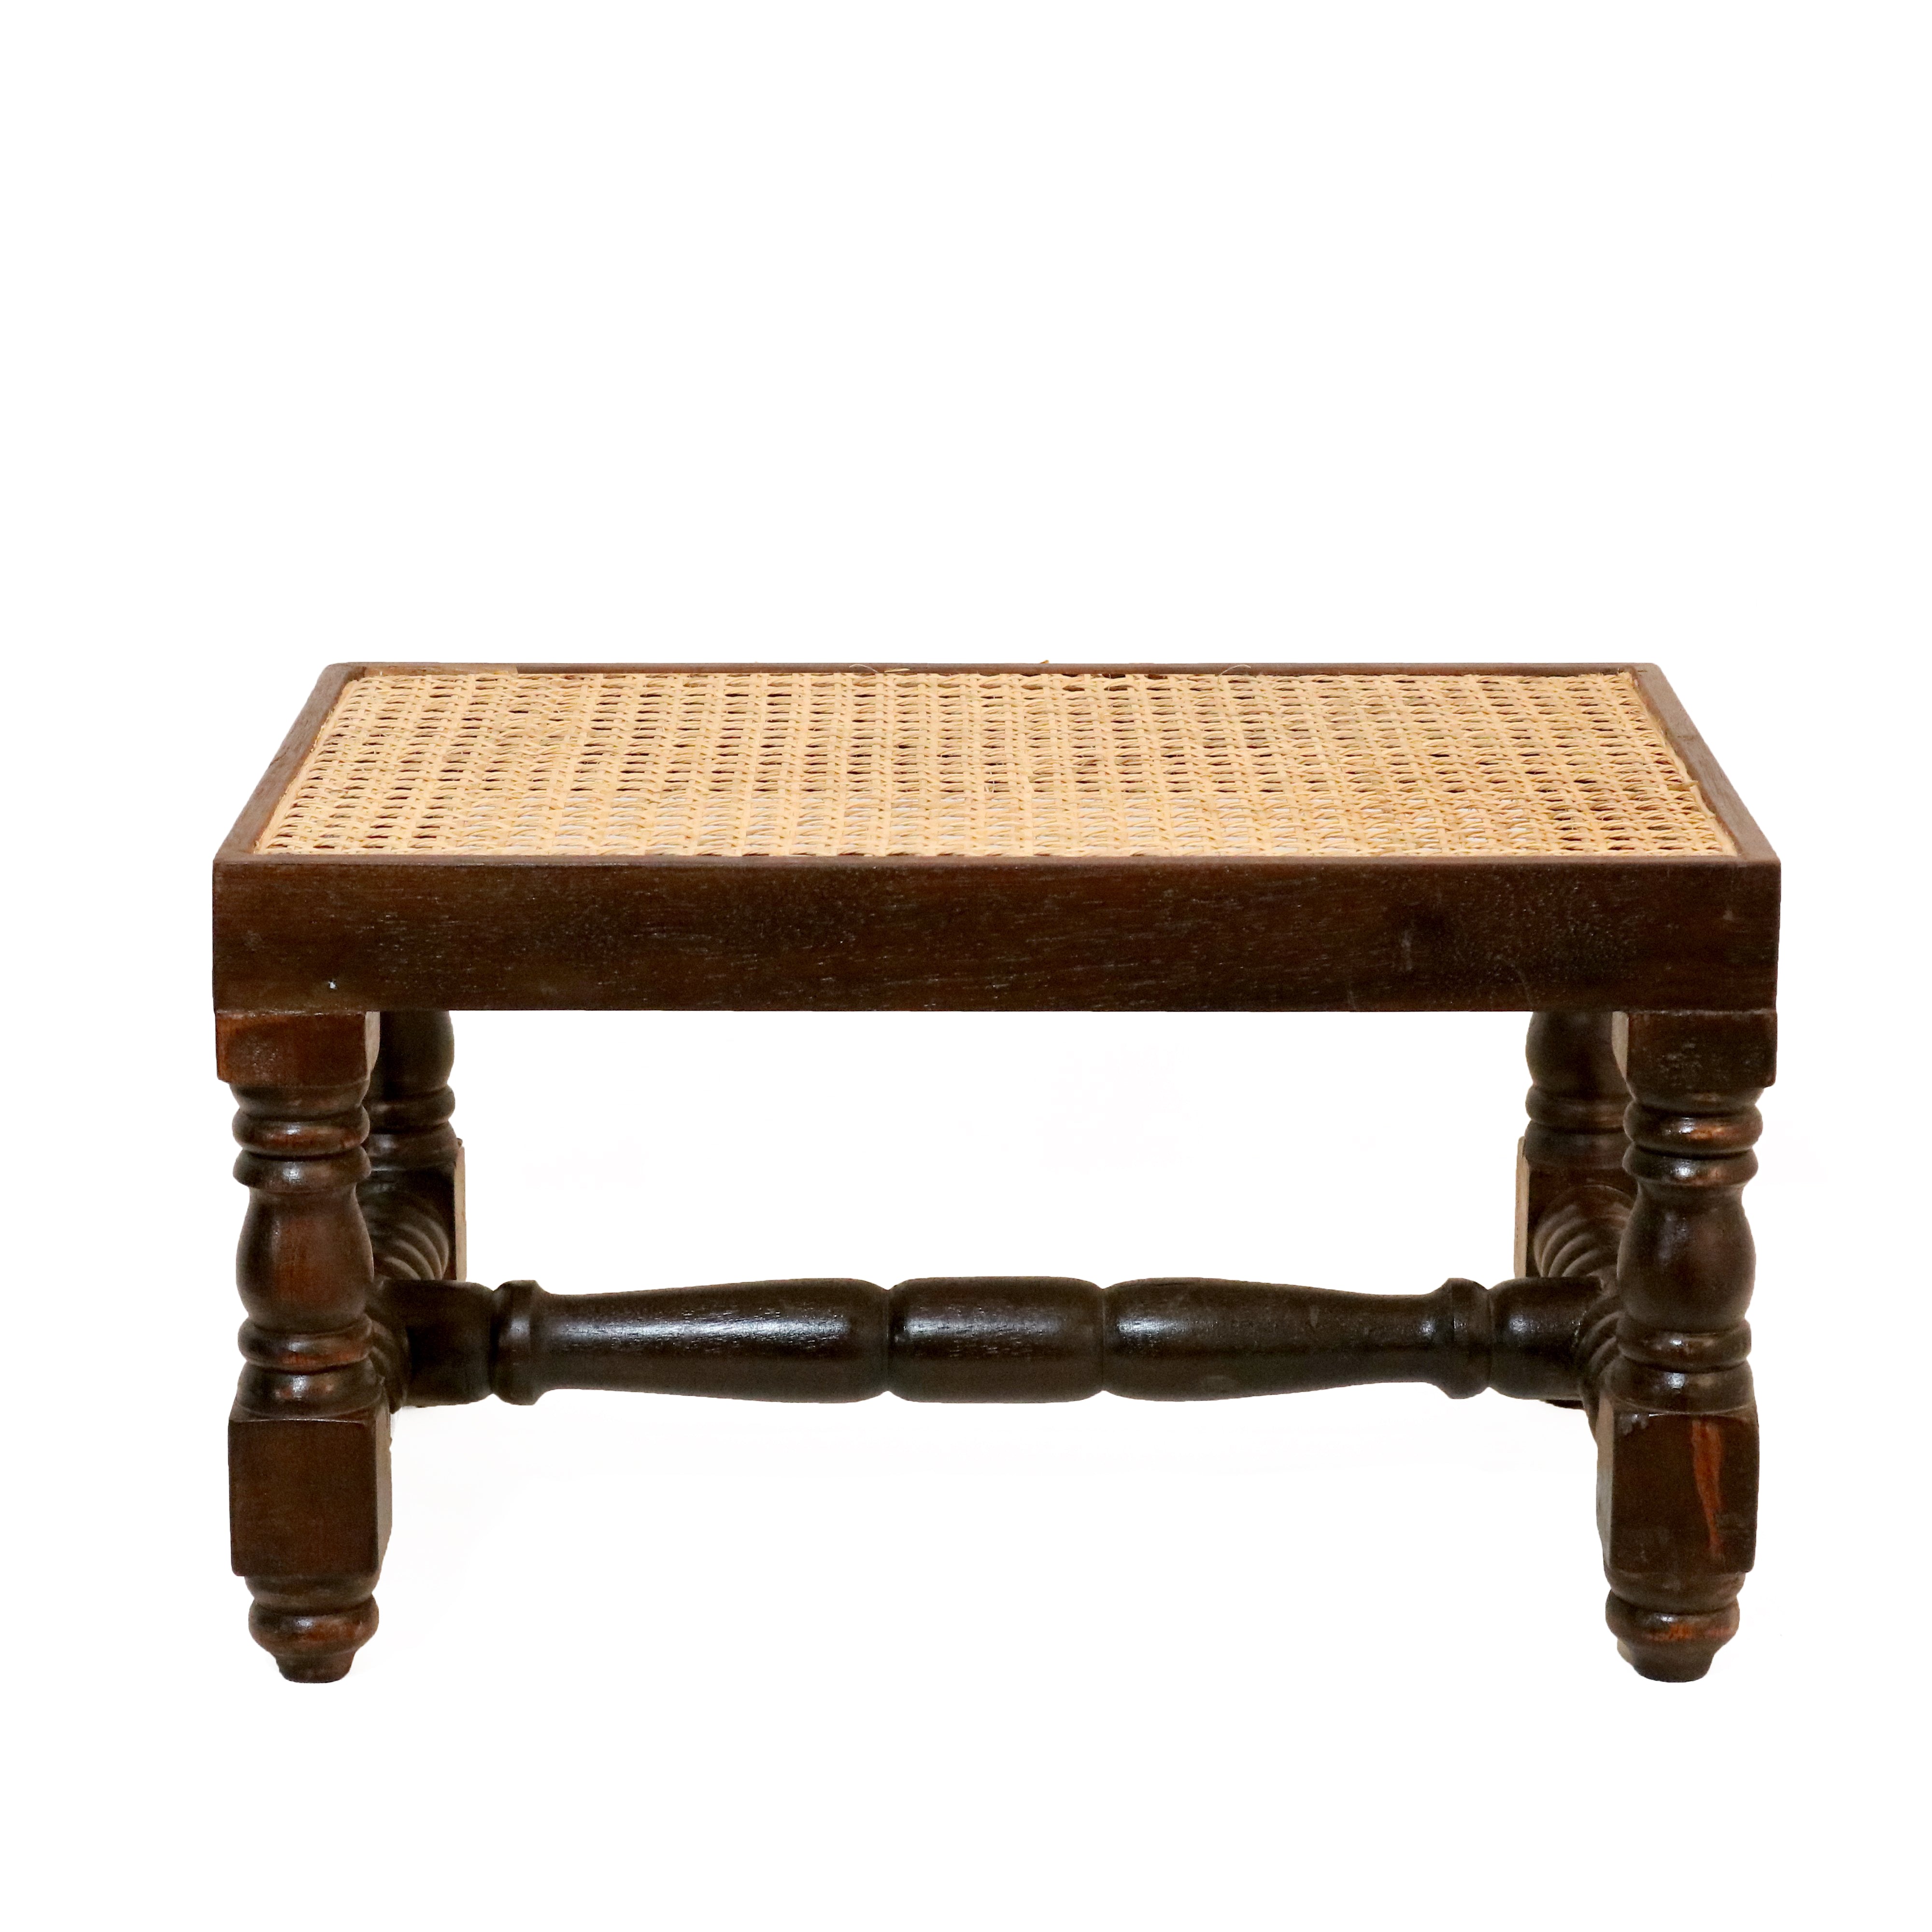 Solid Wooden Intricate Cane Stool Stool